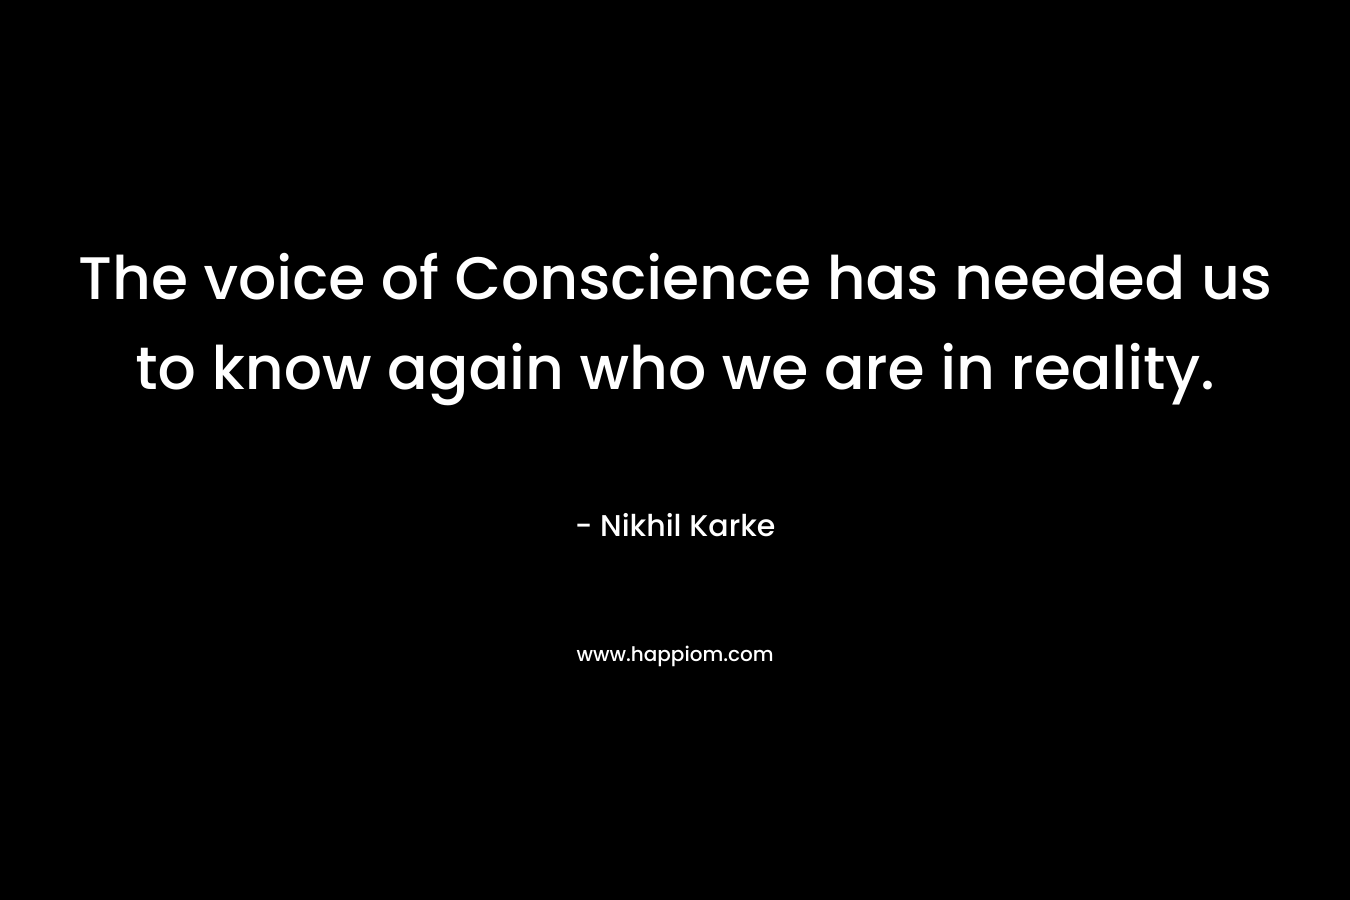 The voice of Conscience has needed us to know again who we are in reality.